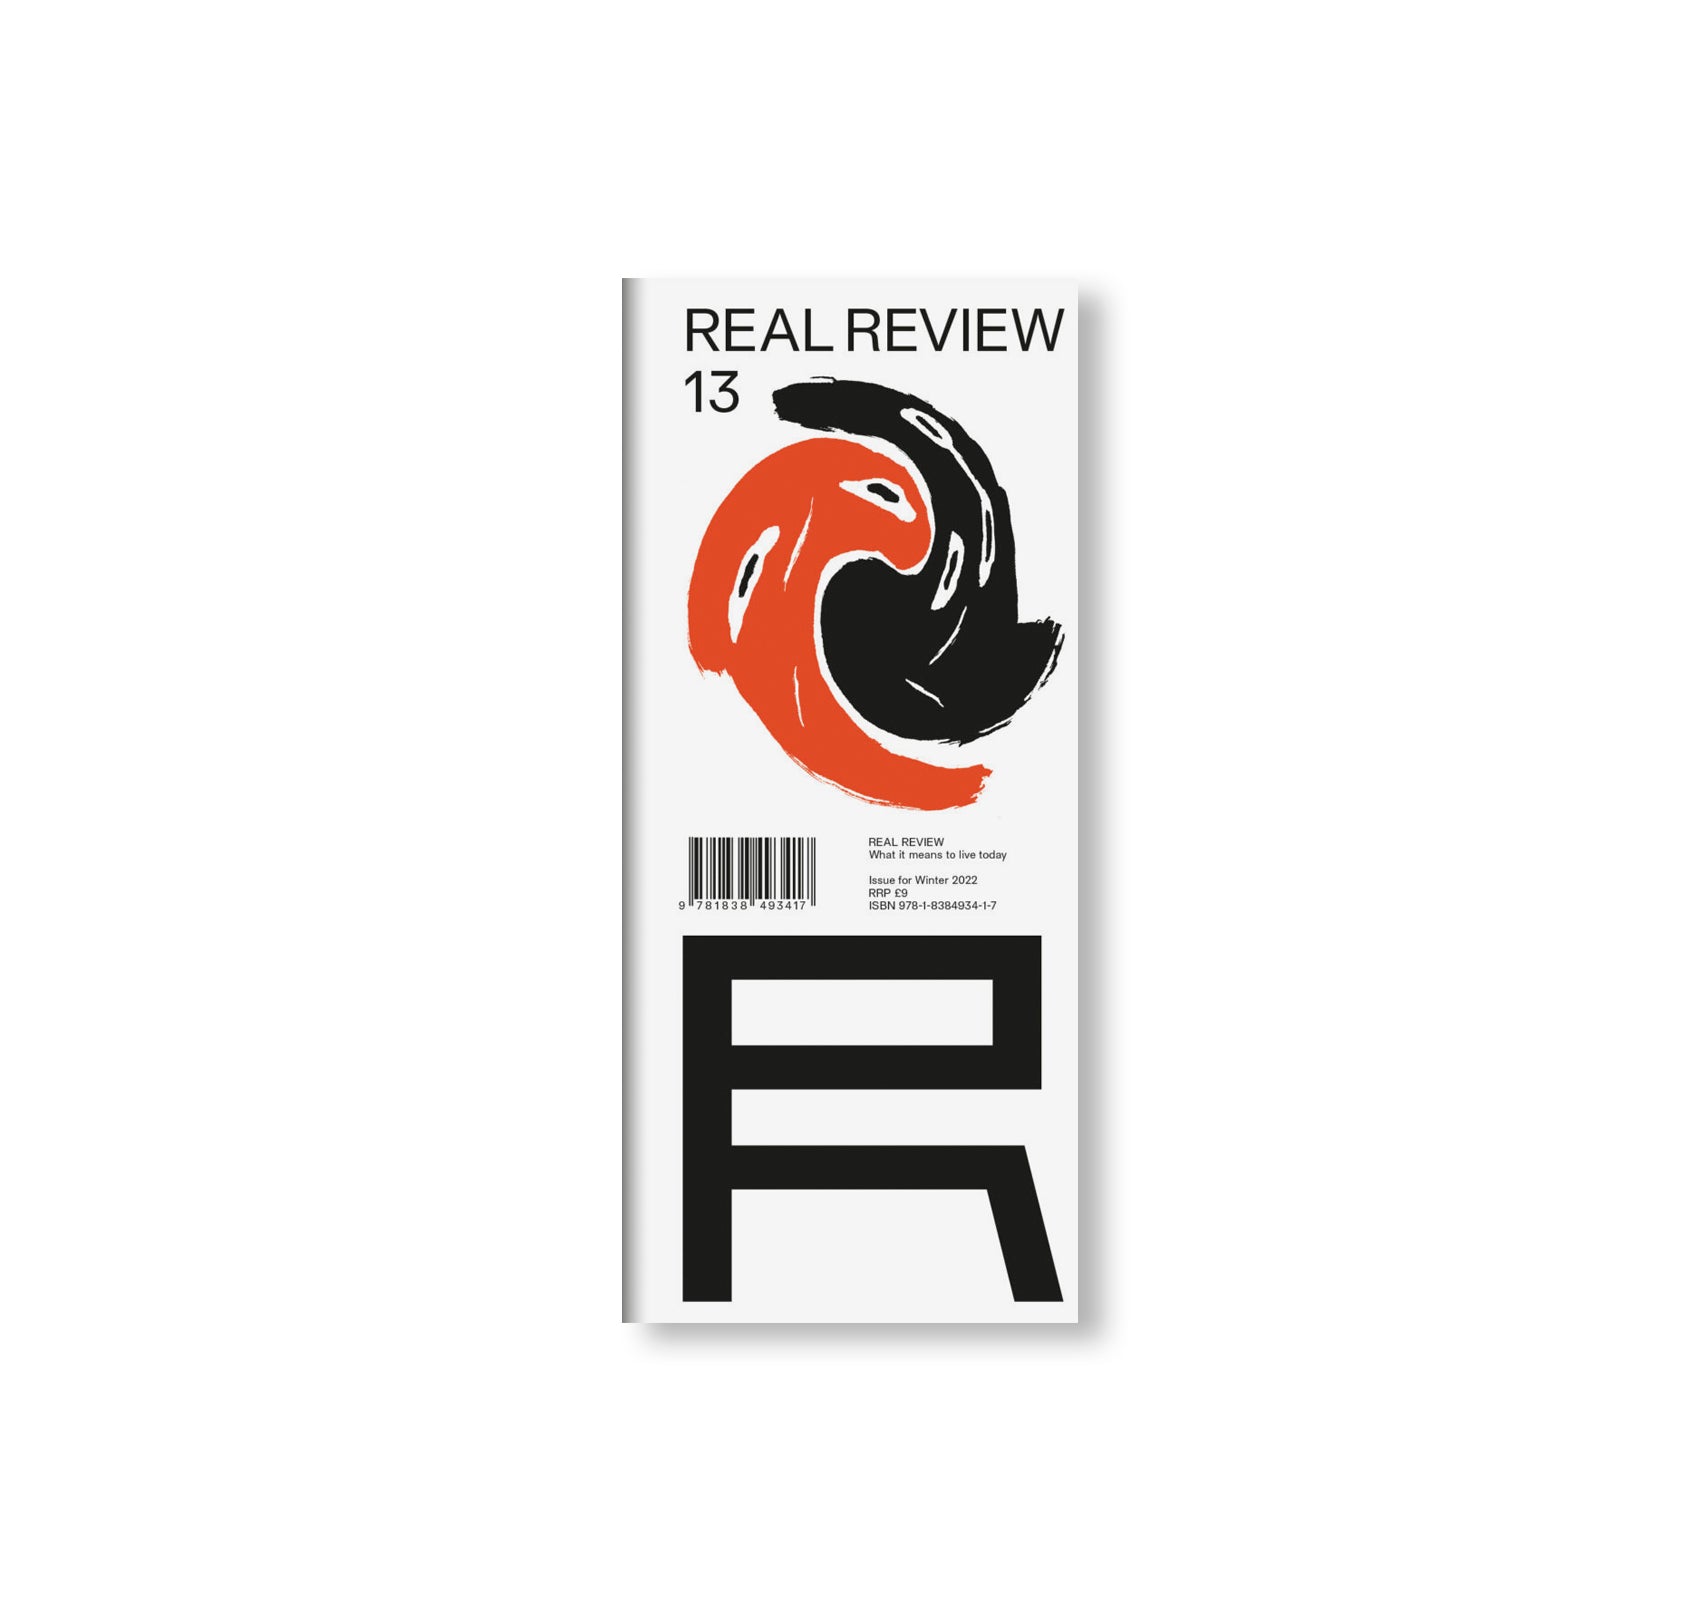 REAL REVIEW 13 Issue for Winter 2022